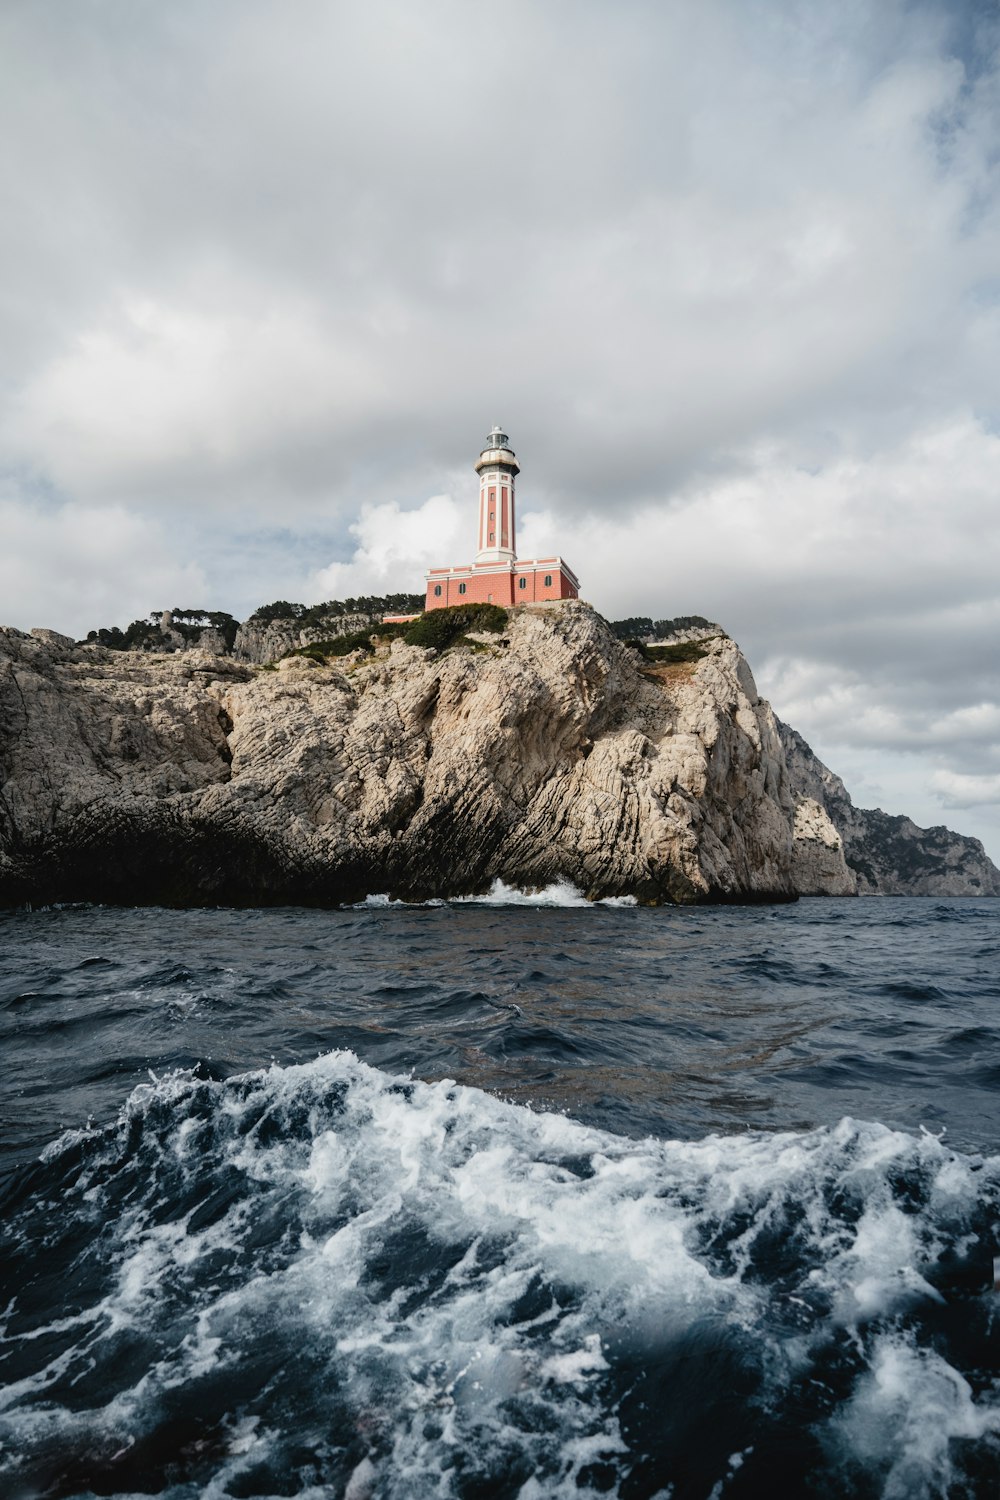 a lighthouse on a rocky cliff with Cape Neddick Light in the background